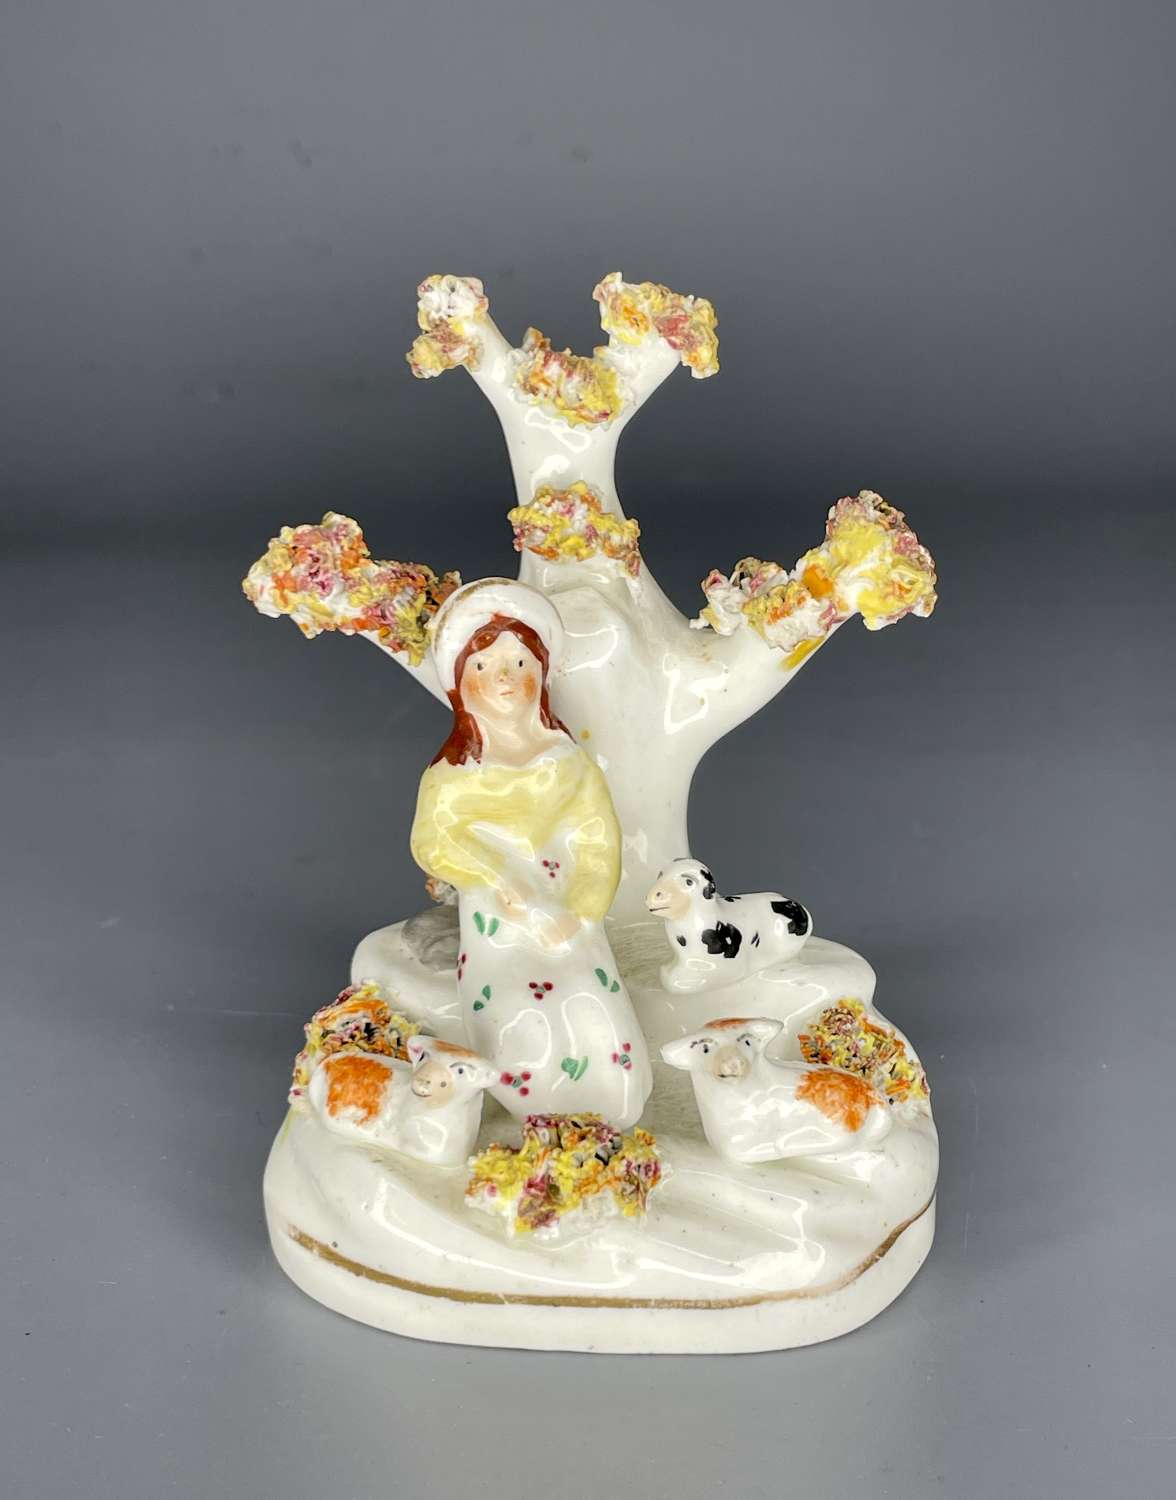 Victorian Staffordshire Porcelain Figure of a Shepherdess with Sheep